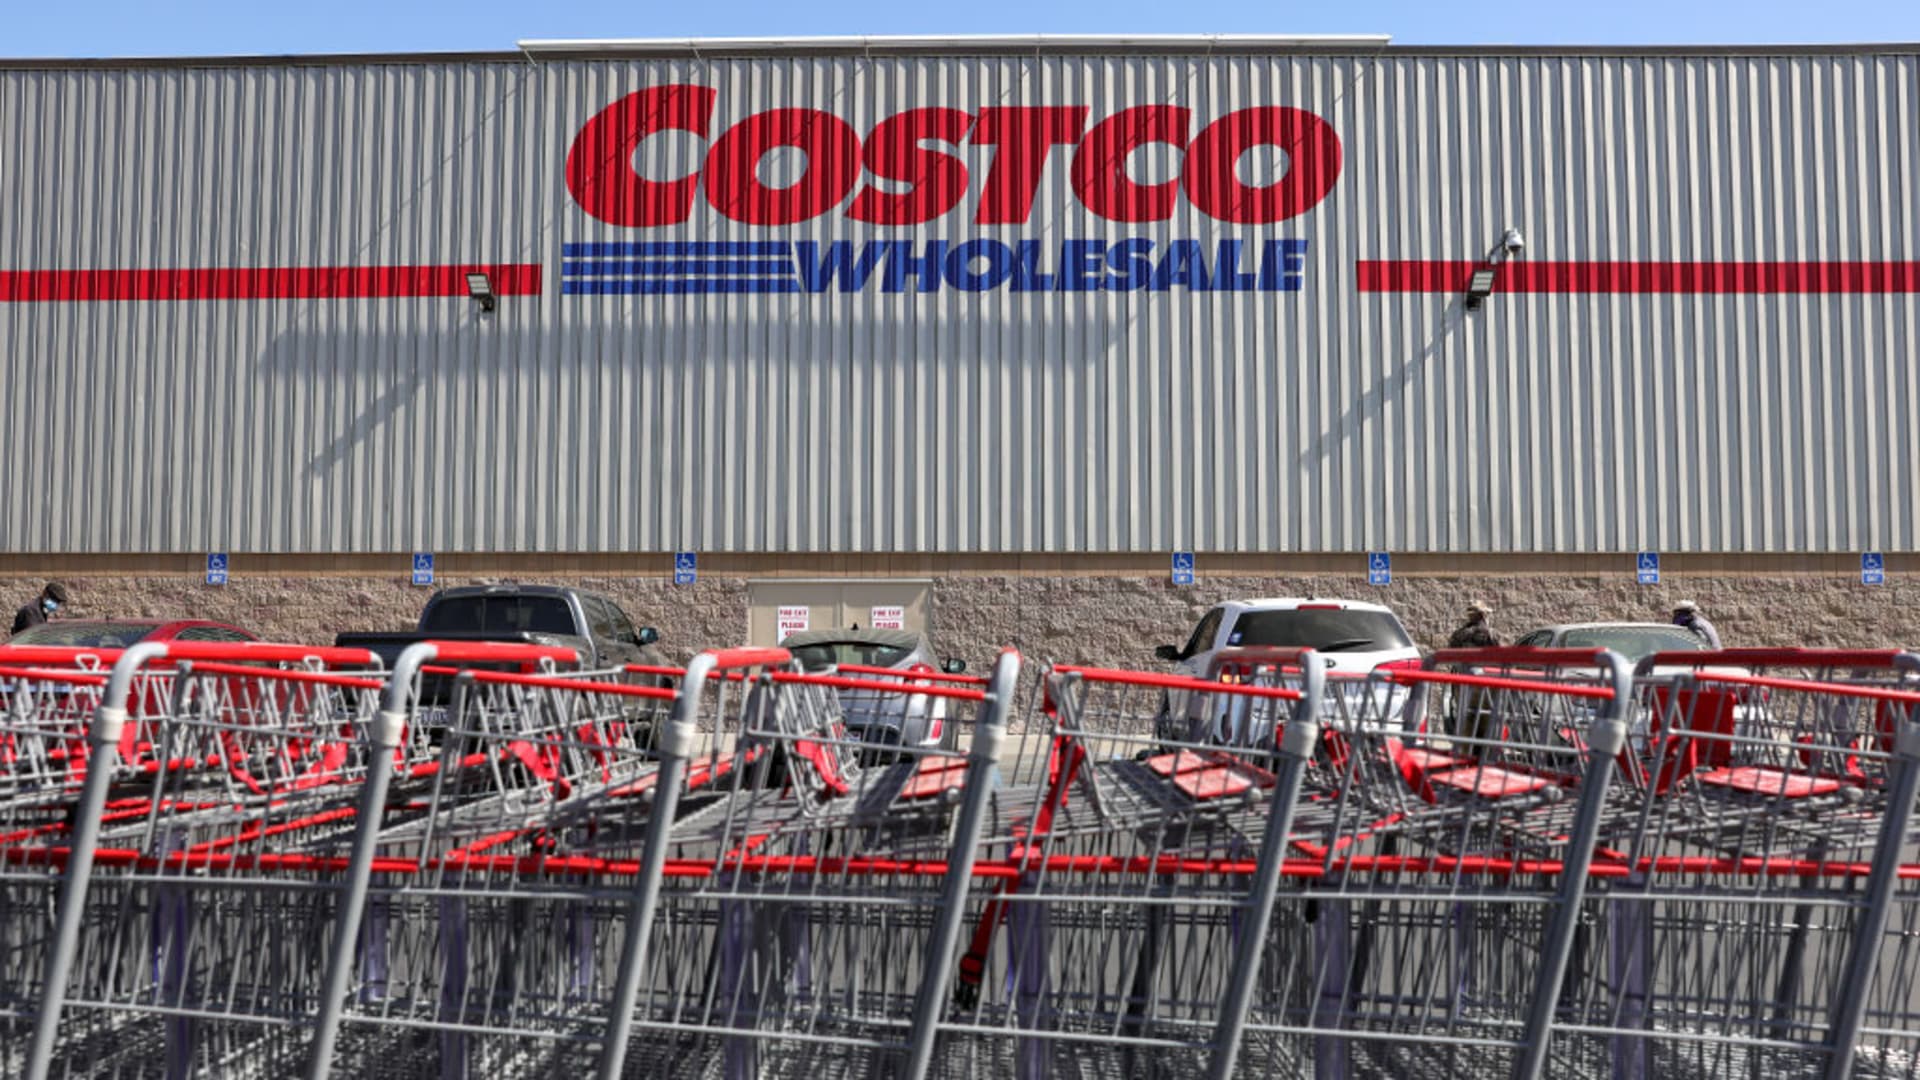 Costco's quarterly results indicate the retailer is thriving despite high inflation – CNBC